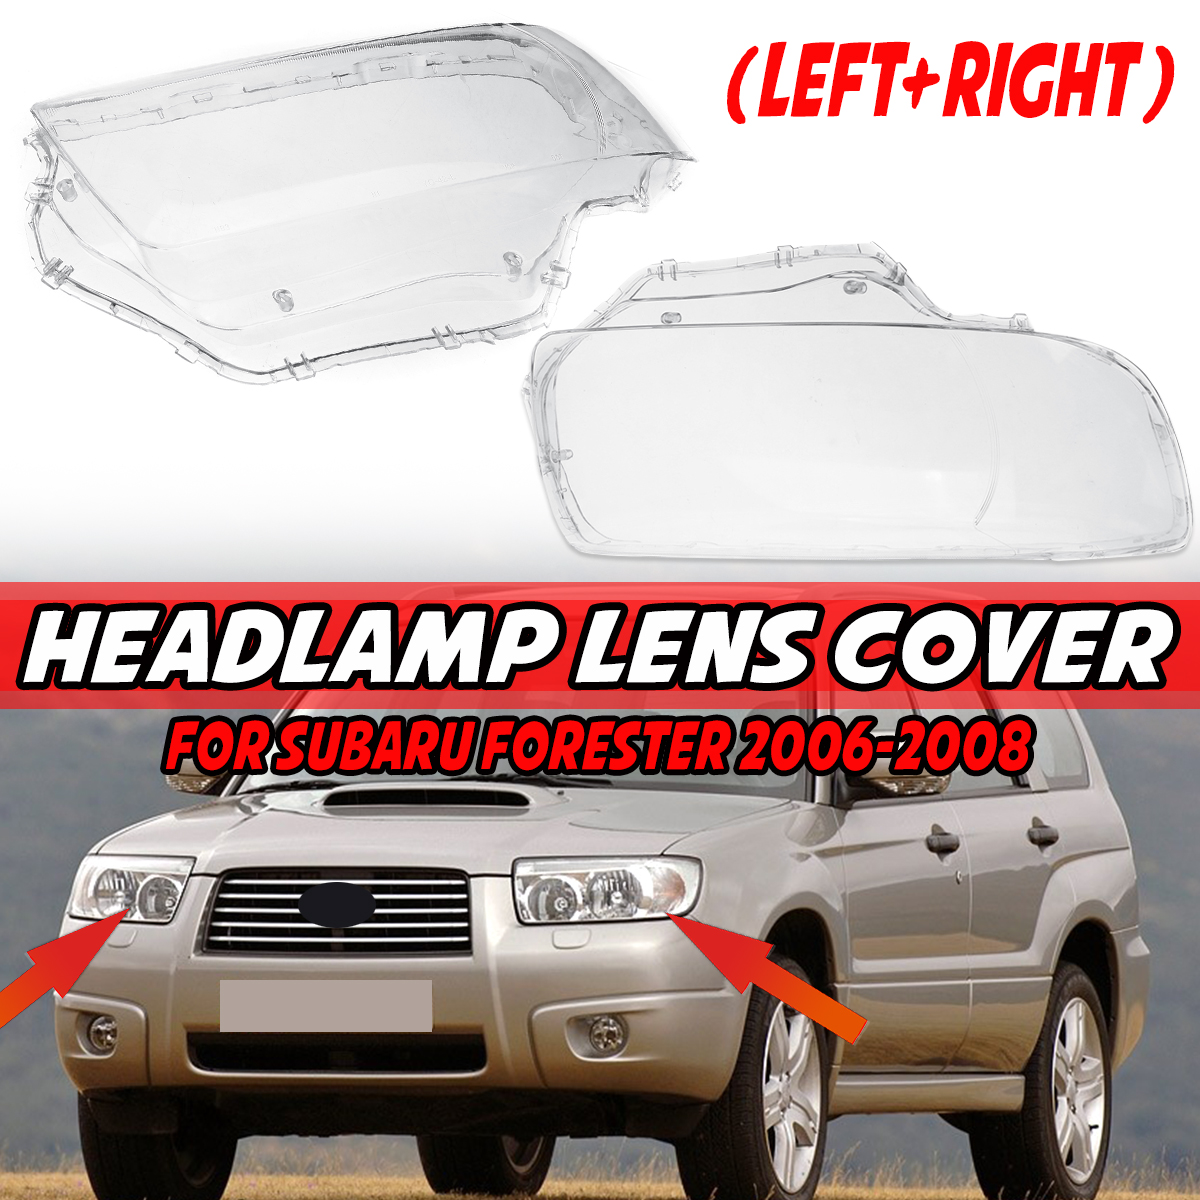 Find For Subaru Forester 2006 2008 Headlight Headlamp Lens Cover Left Right for Sale on Gipsybee.com with cryptocurrencies